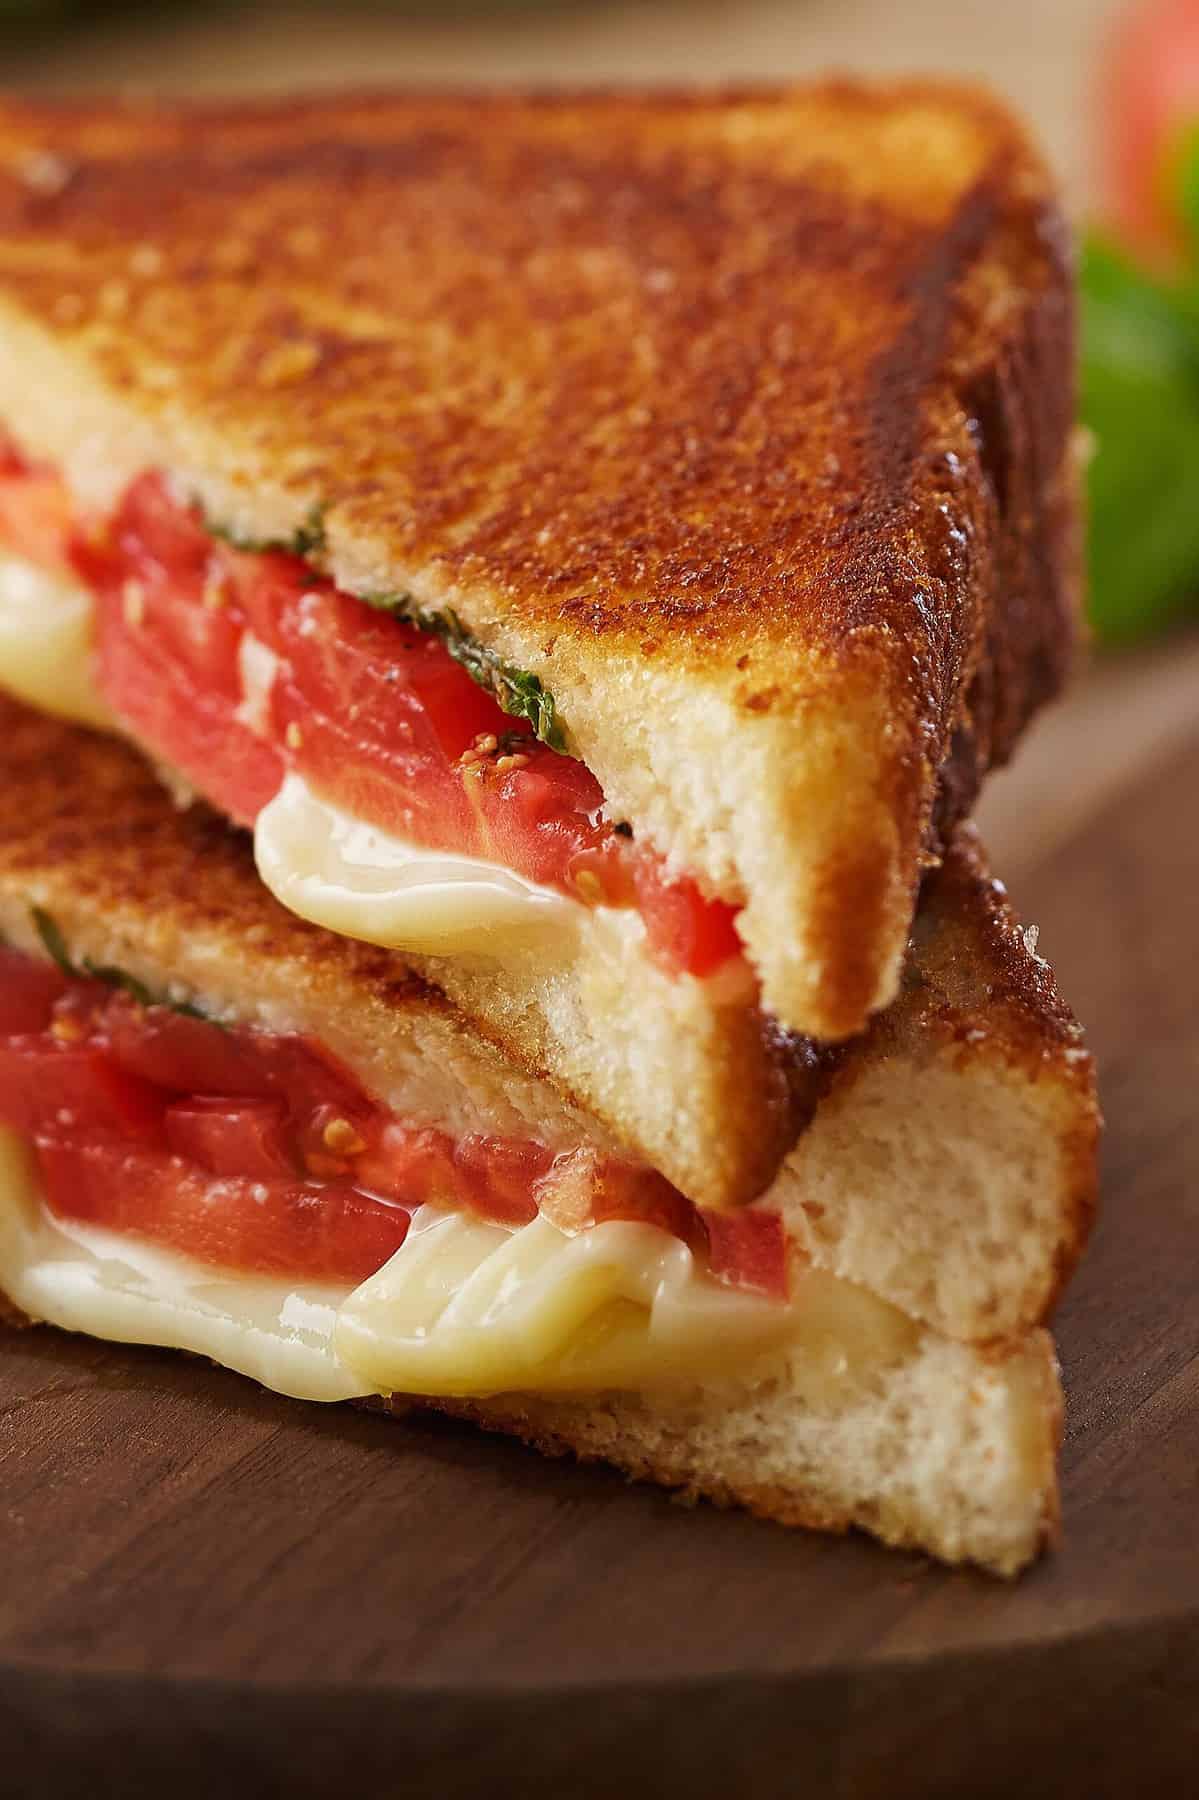  Nothing beats a classic grilled cheese with a twist!